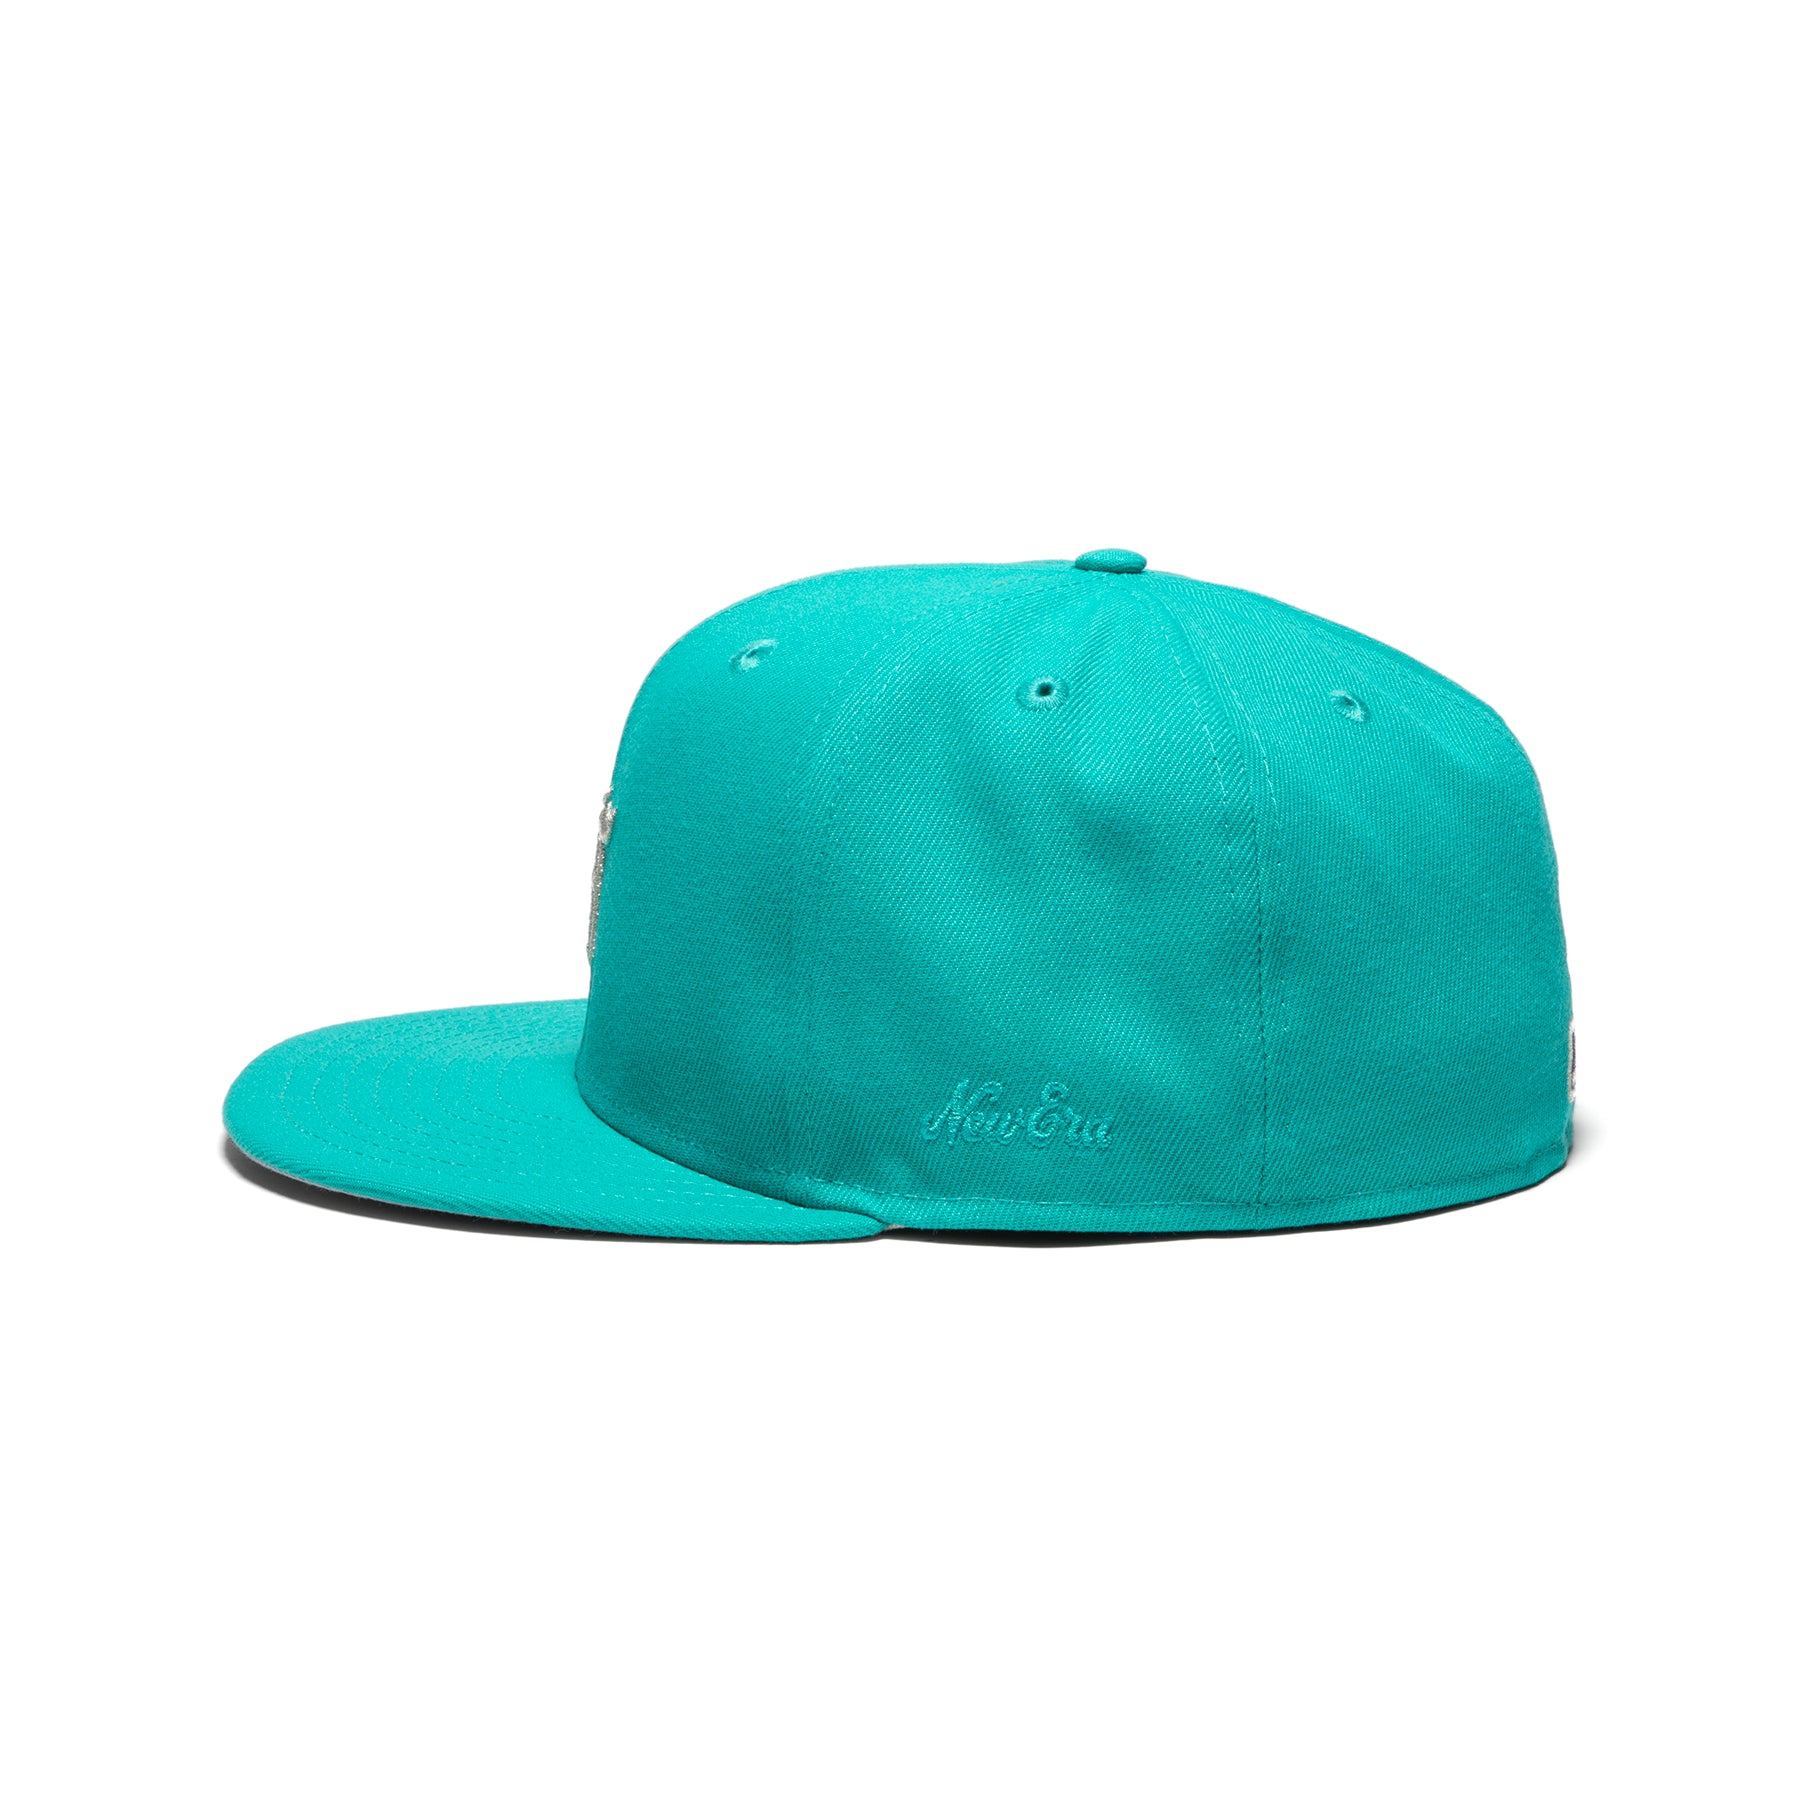 New Era x Fear of God 59Fifty Fitted Cap (Blue)